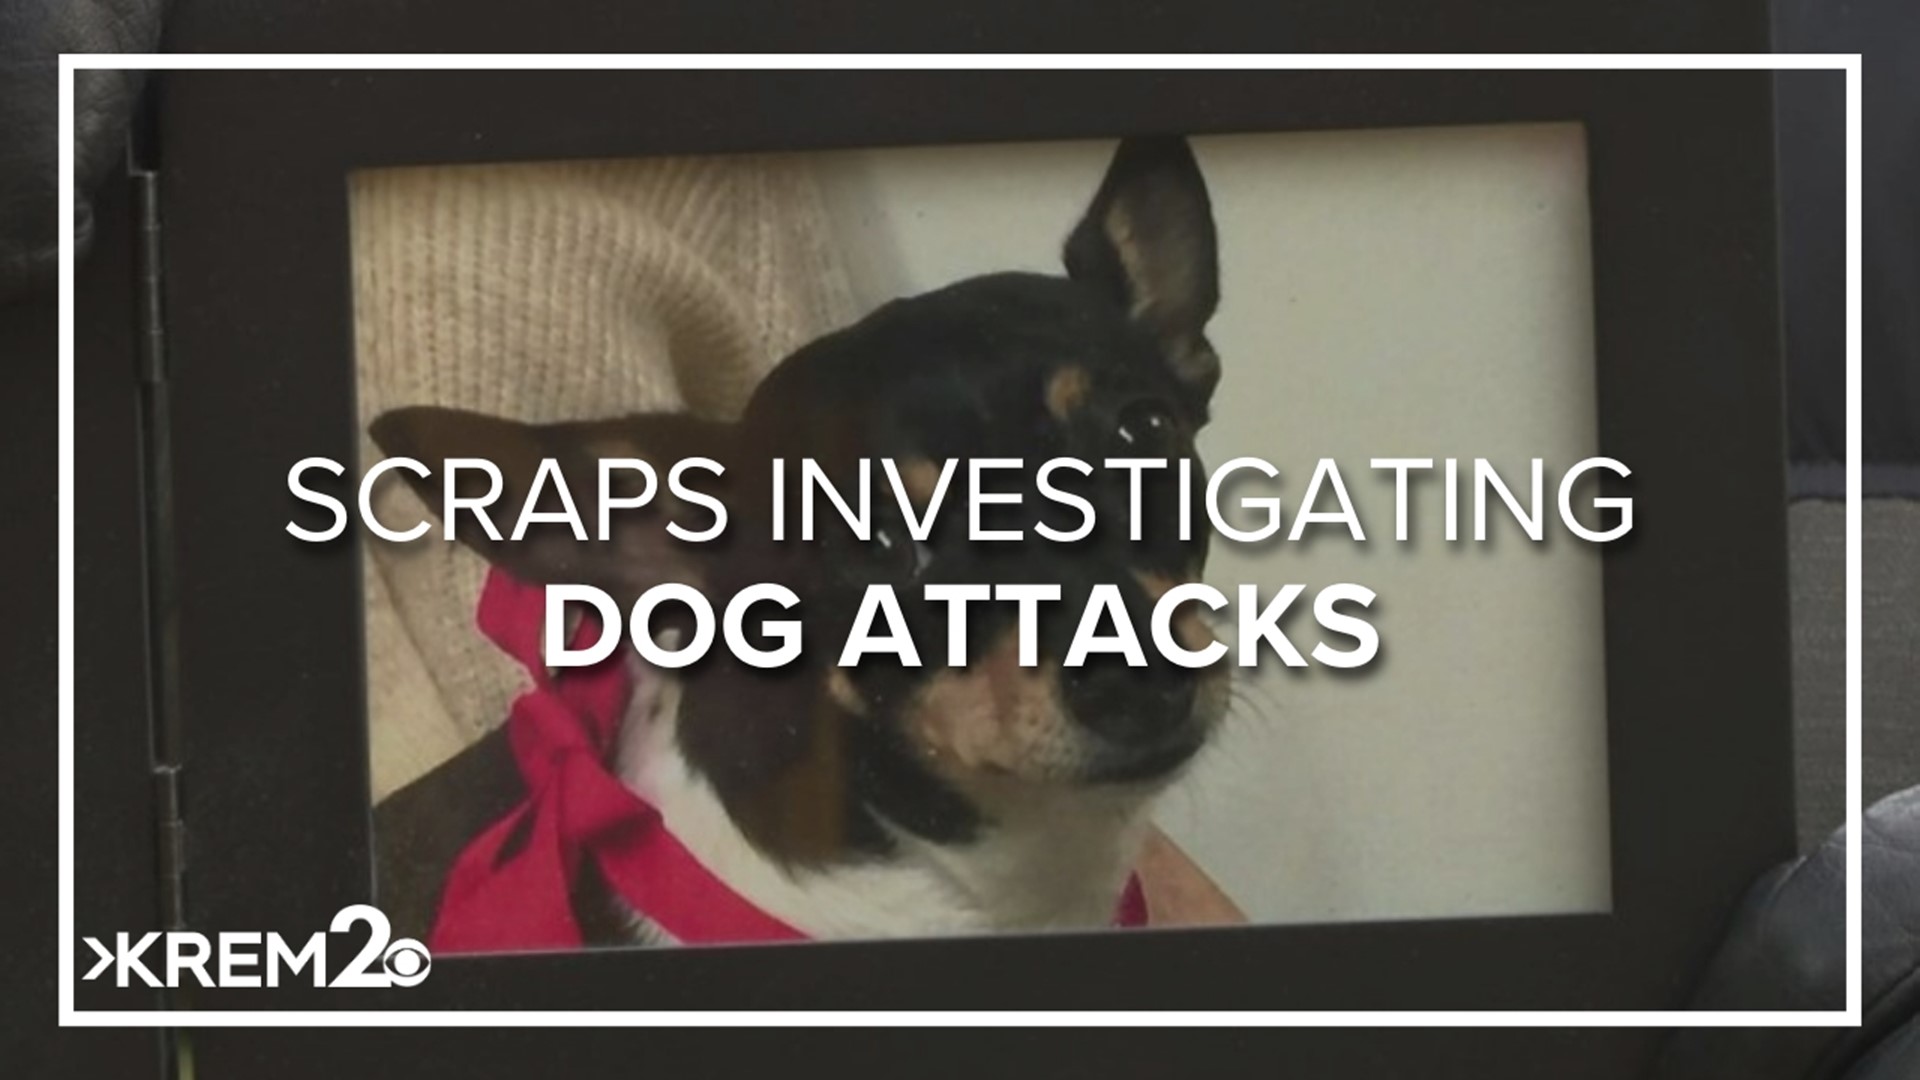 SCRAPS said the two dogs involved in the Comstock attacks have been deemed dangerous. They also said the dogs' owner is trying to appeal the designation.